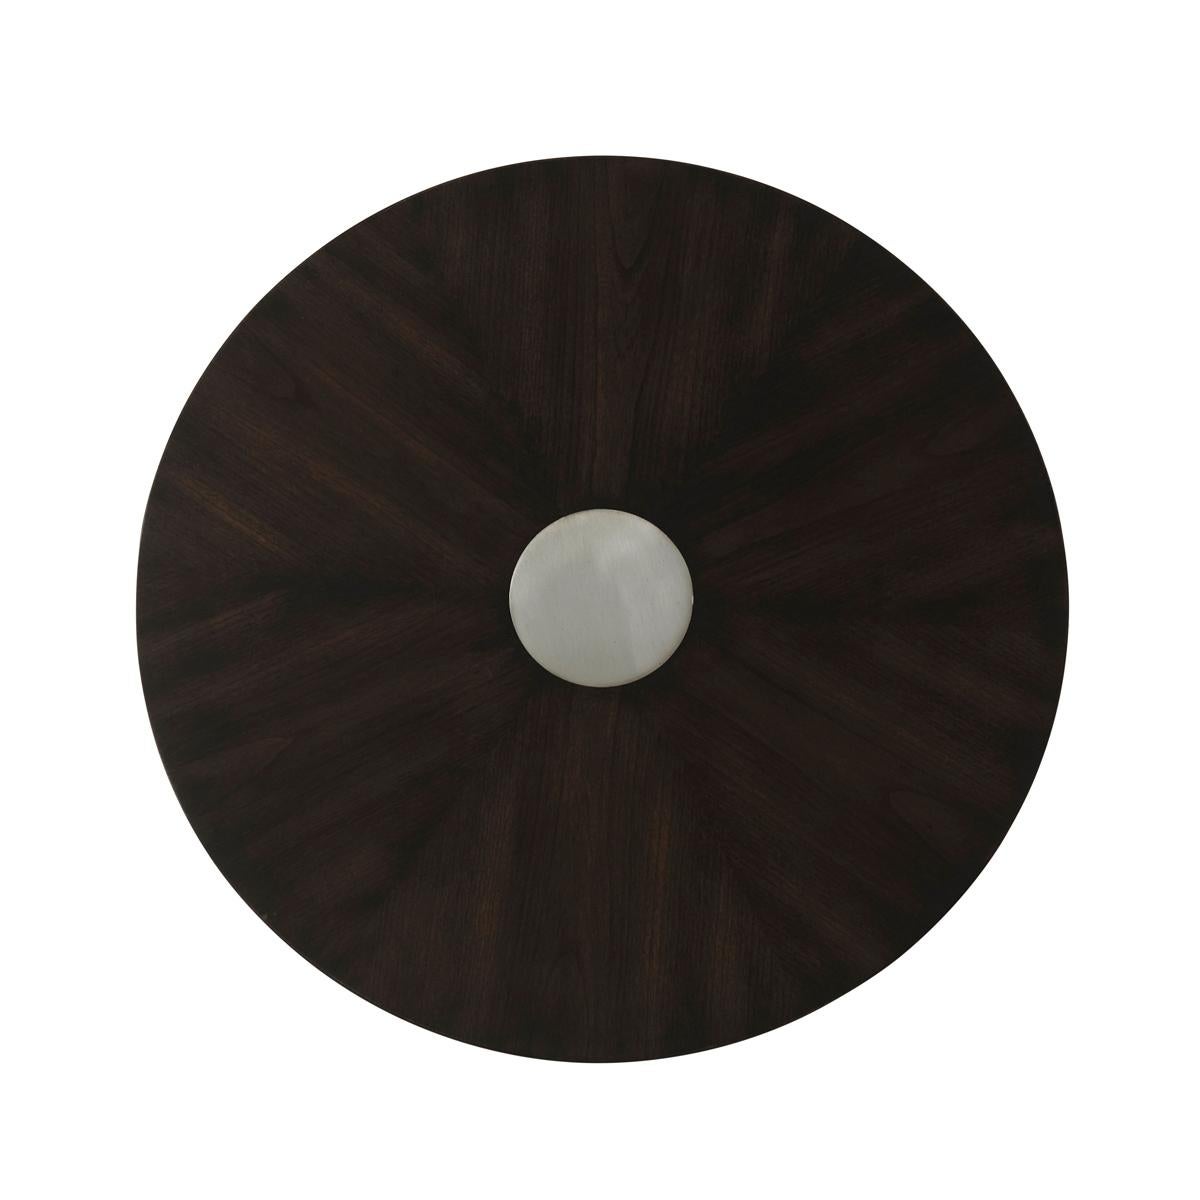 In the dark Ossian finish to the starburst cherry veneered top with a central metal inlaid decorative dic. Raised on a tapered column pedestal wrapped in a grey leather detail.

Dimensions: 20